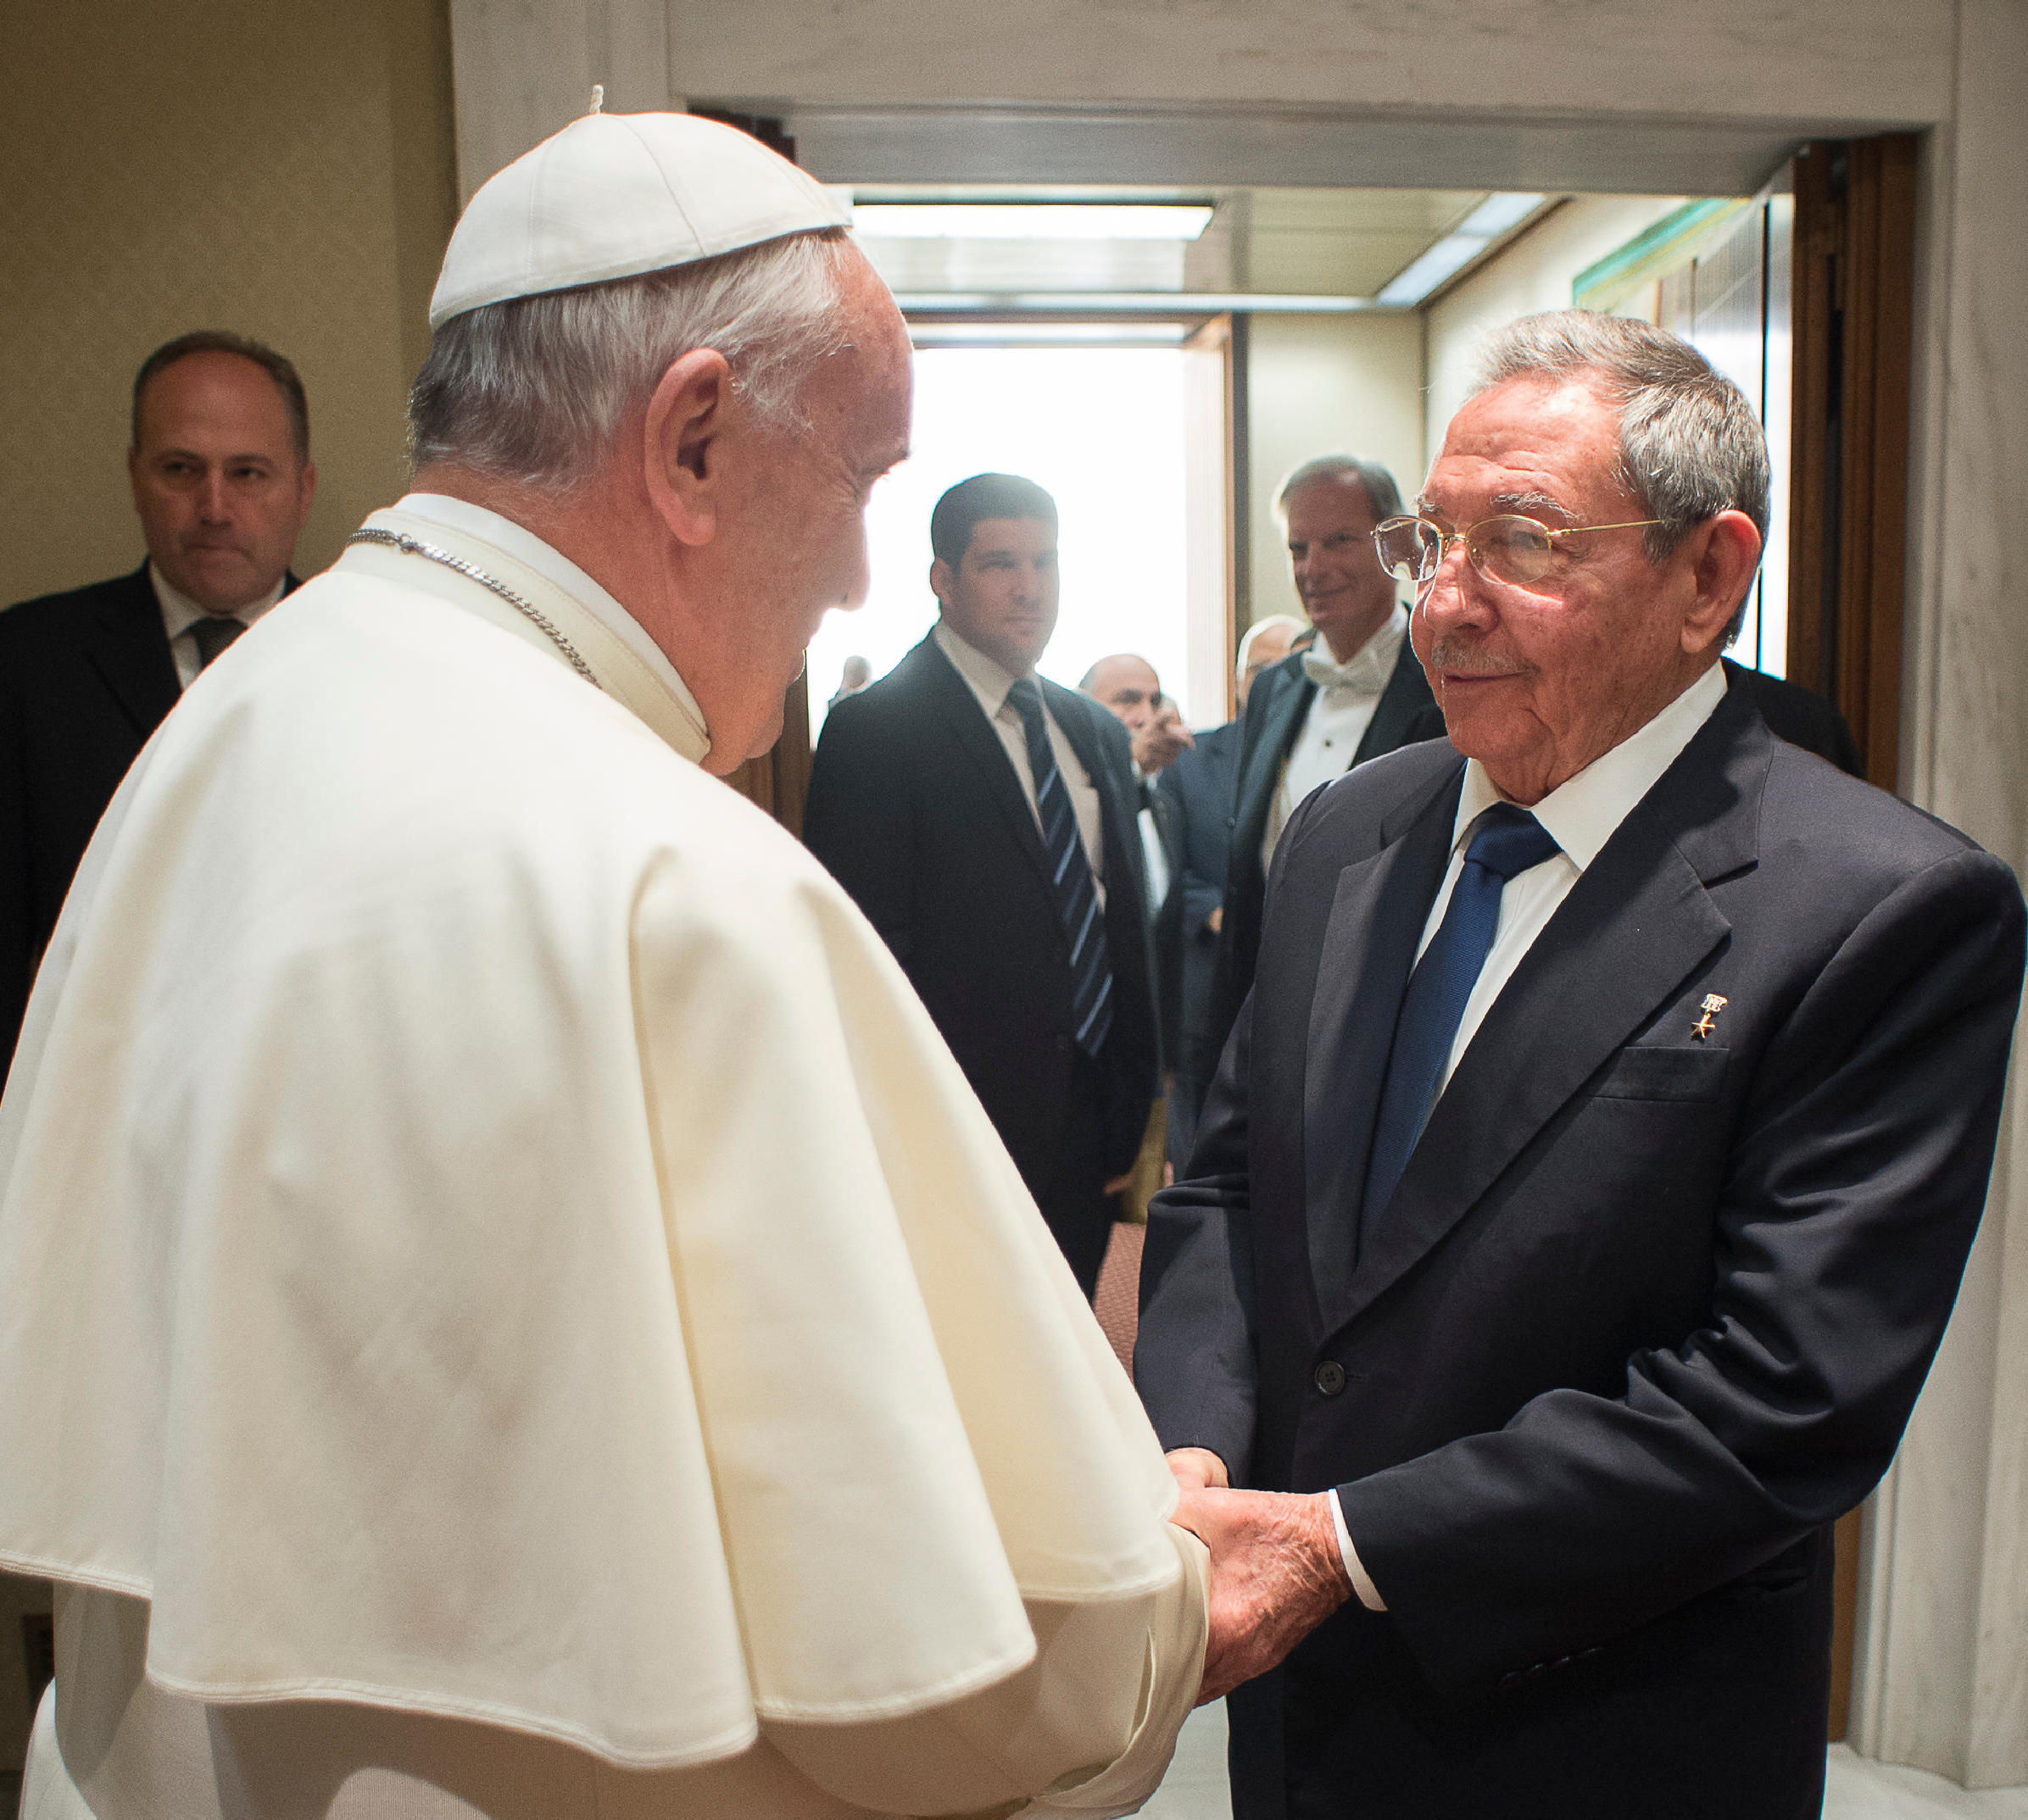 The pope Francis ightened of hand at Cuban president Raul Castro. Vatican City 10 May 2015